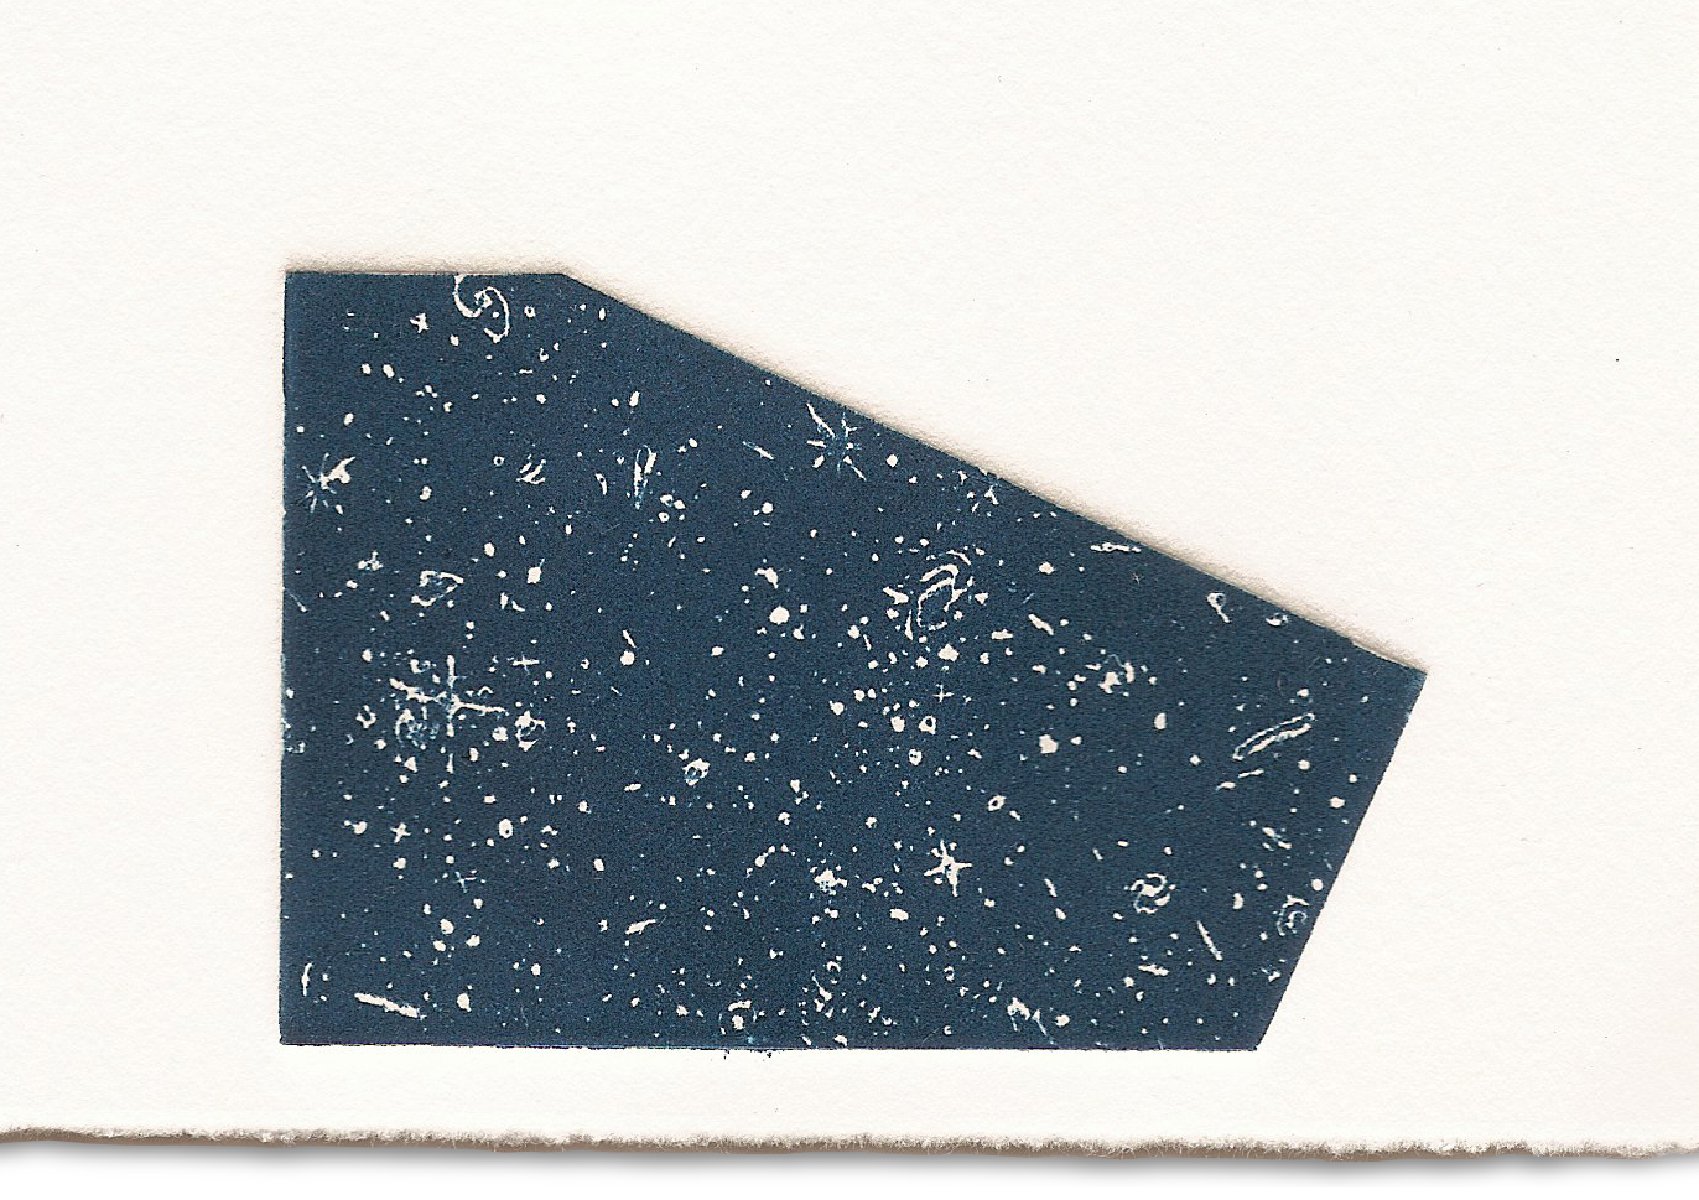   Outer Space  line etching on paper. 2009 